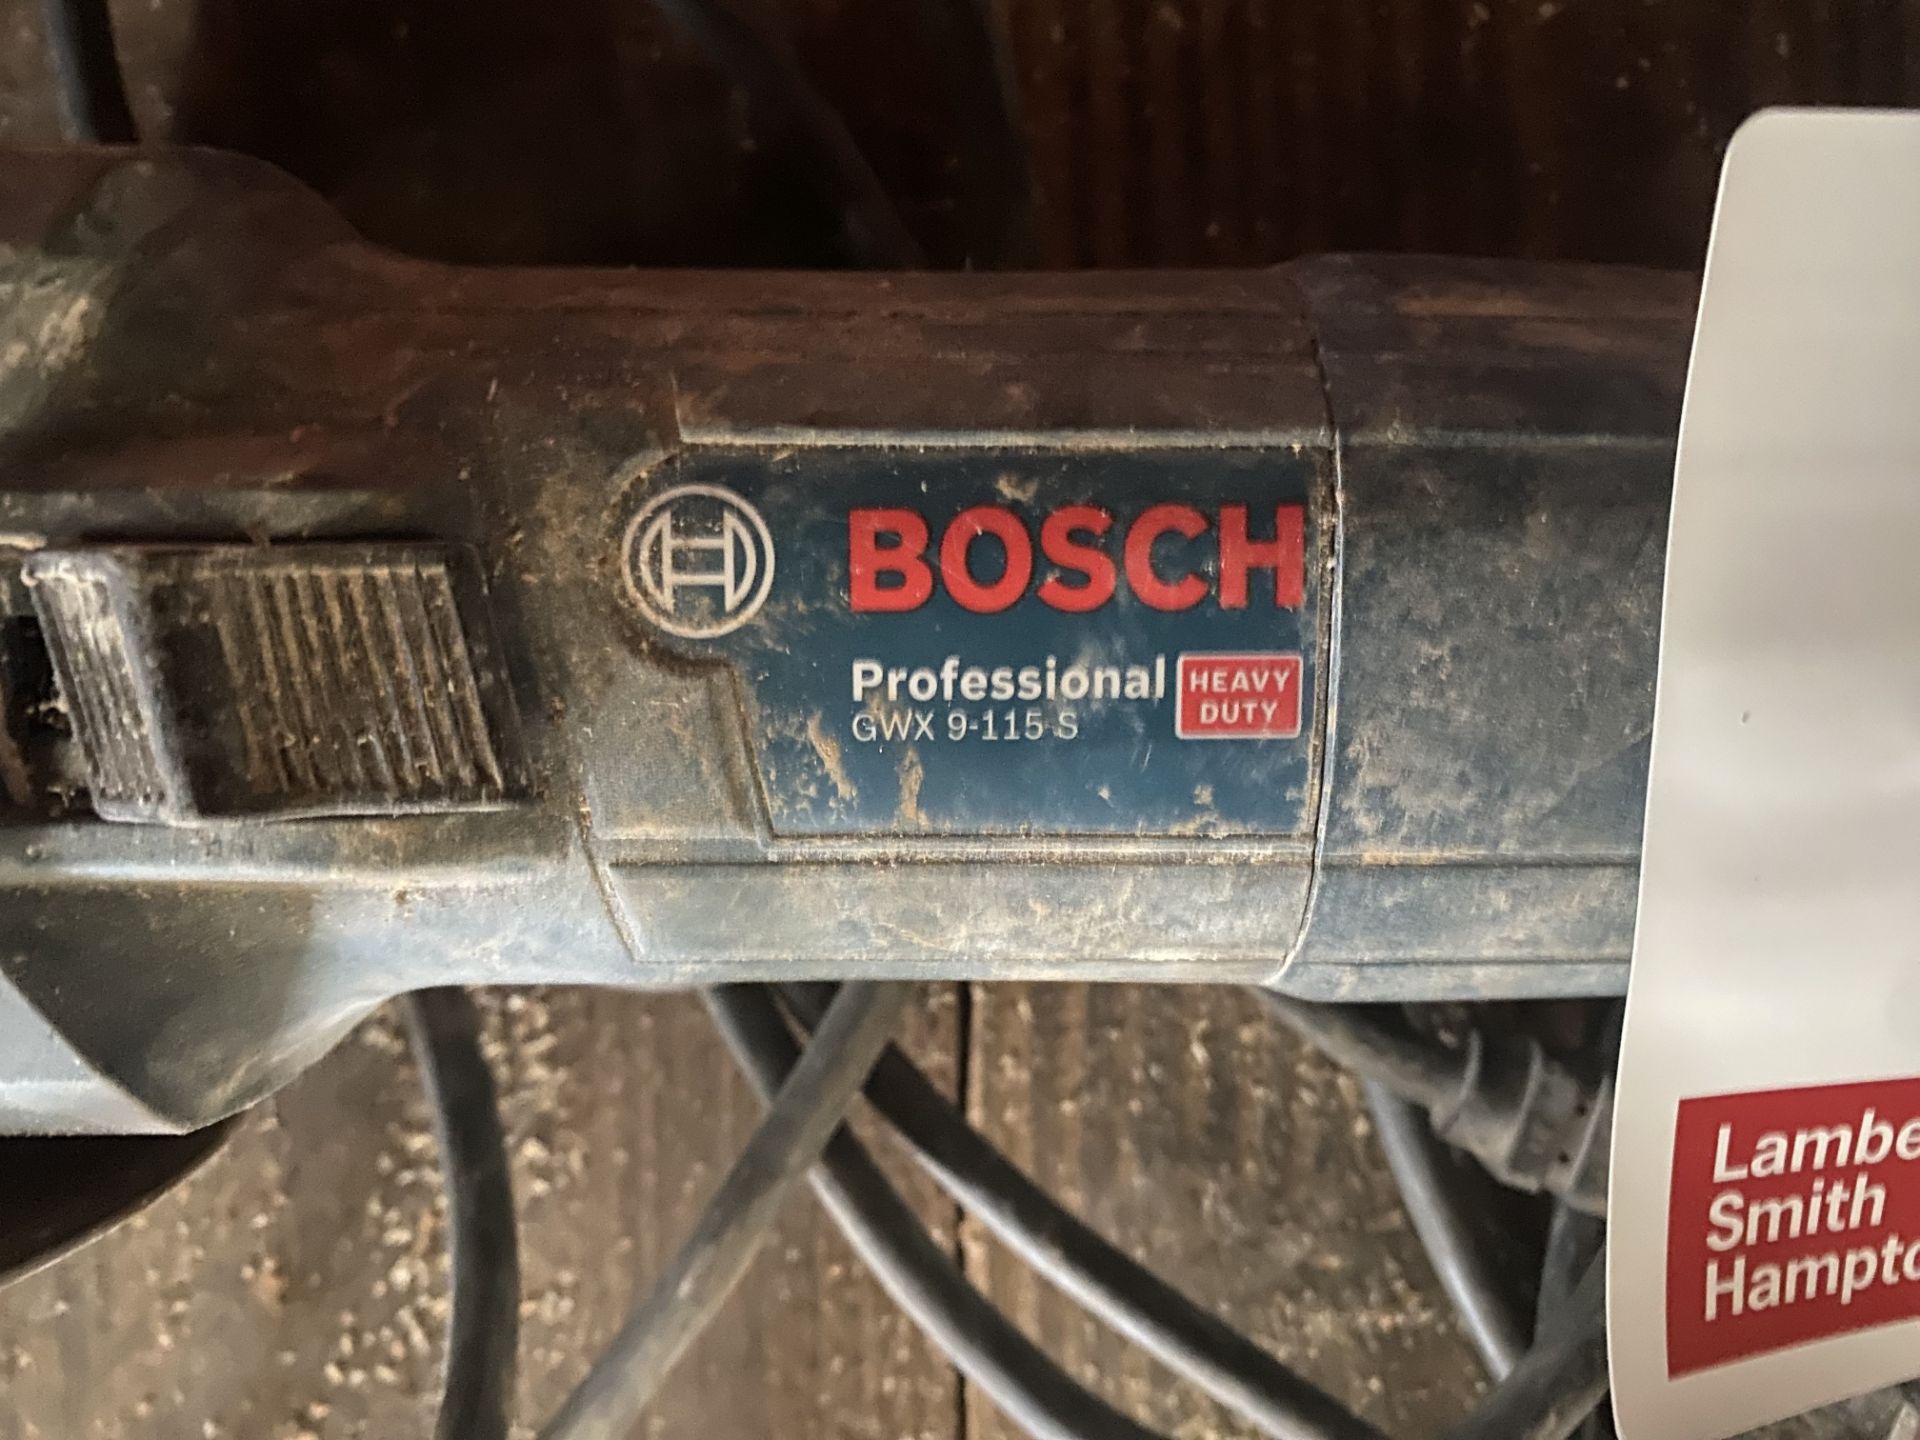 Bosch Professional GWX9-115 angle grinder, 240v Located at Coleton Fishacre, Brown Stone Road, - Image 2 of 3